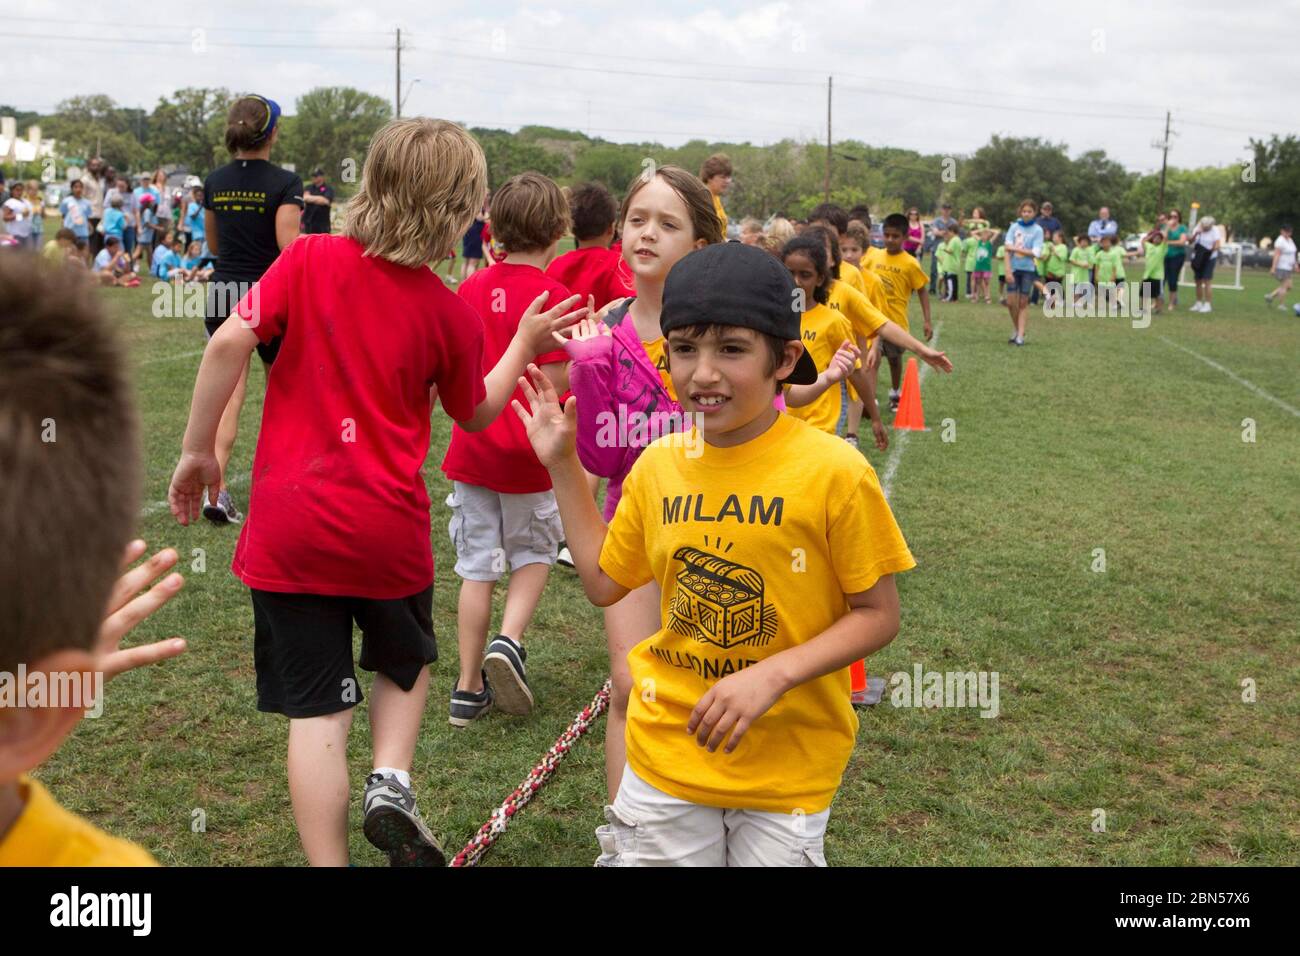 Austin Texas USA, May 10 2012: Group of multi-ethnic second grade elementary school students high-five each other after competing in tug-of-war game during school field day activities. ©Marjorie Kamys Cotera/Daemmrich Photography Stock Photo